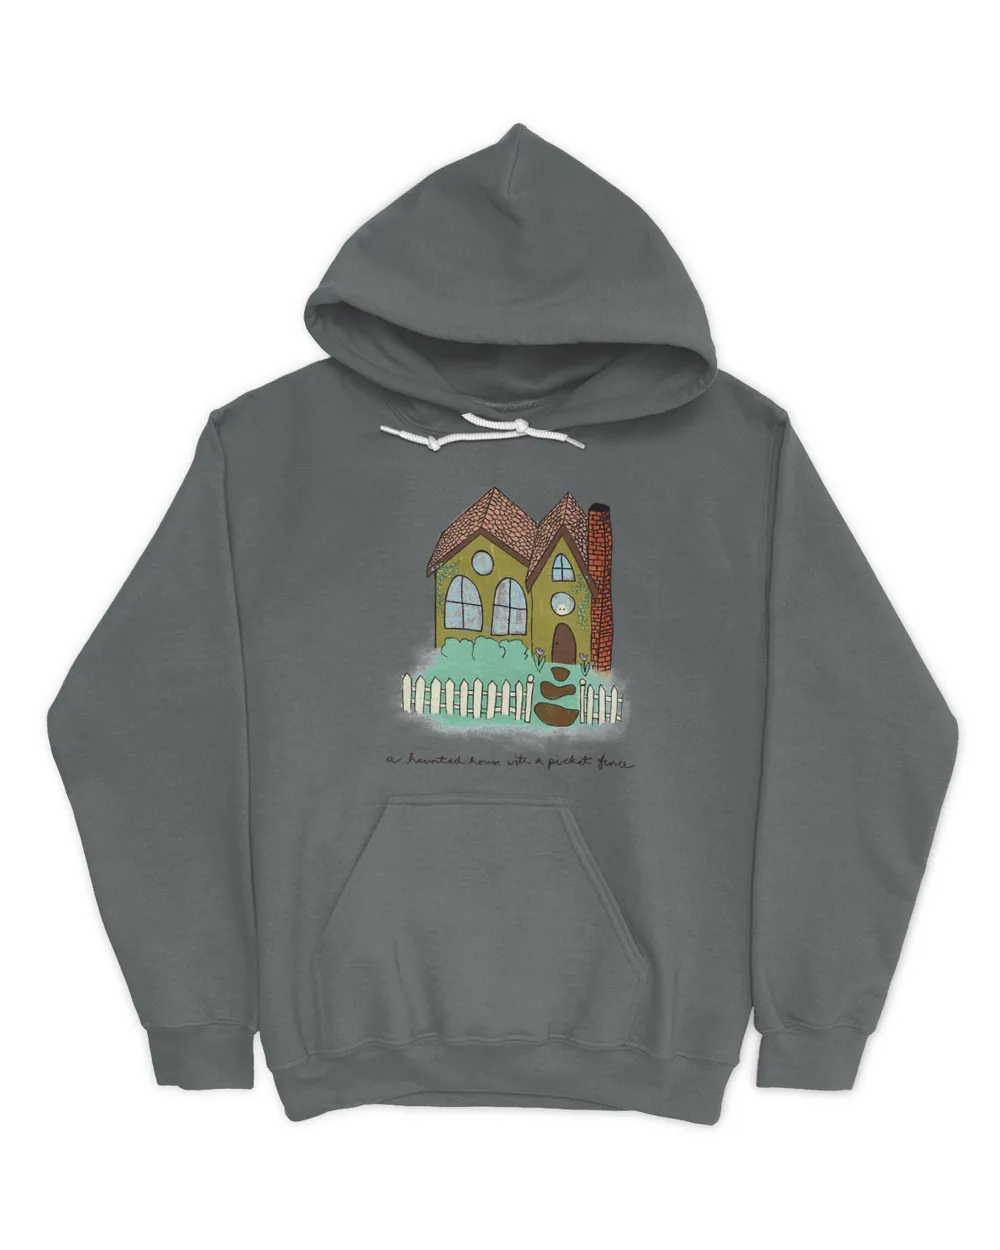 Pheobe Bridgers Haunted House with a Picket Fence Classic T-Shirt